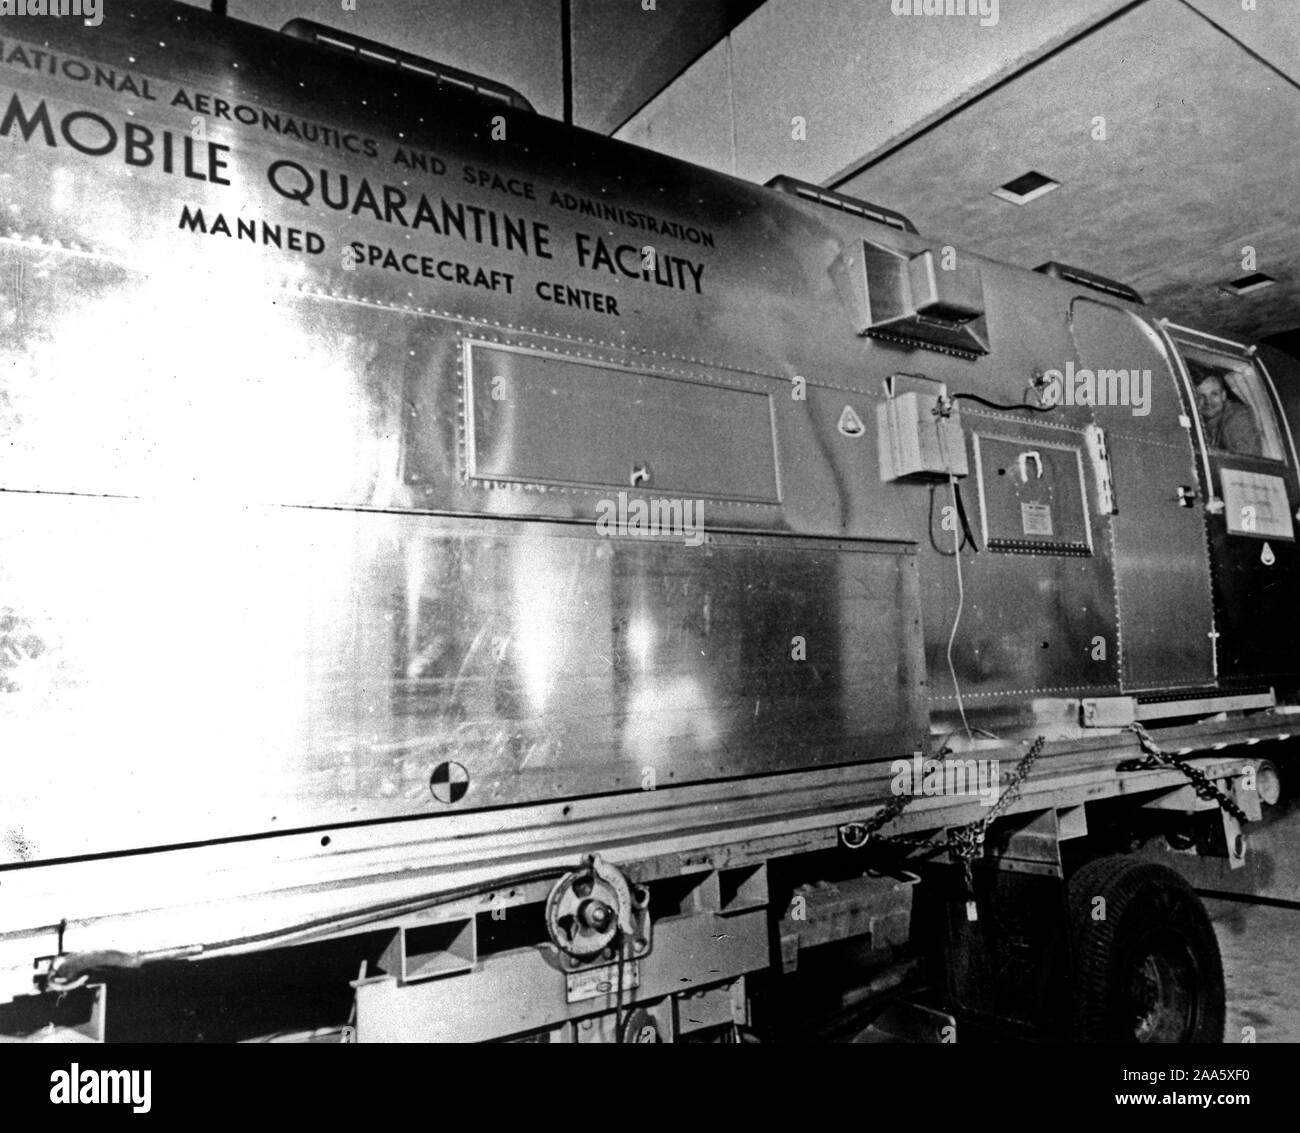 Mobile Quarantine Facility (MQF) which served as their home until they reached the NASA Manned Spacecraft Center (MSC) Lunar Receiving Laboratory in Houston, Texas. Stock Photo